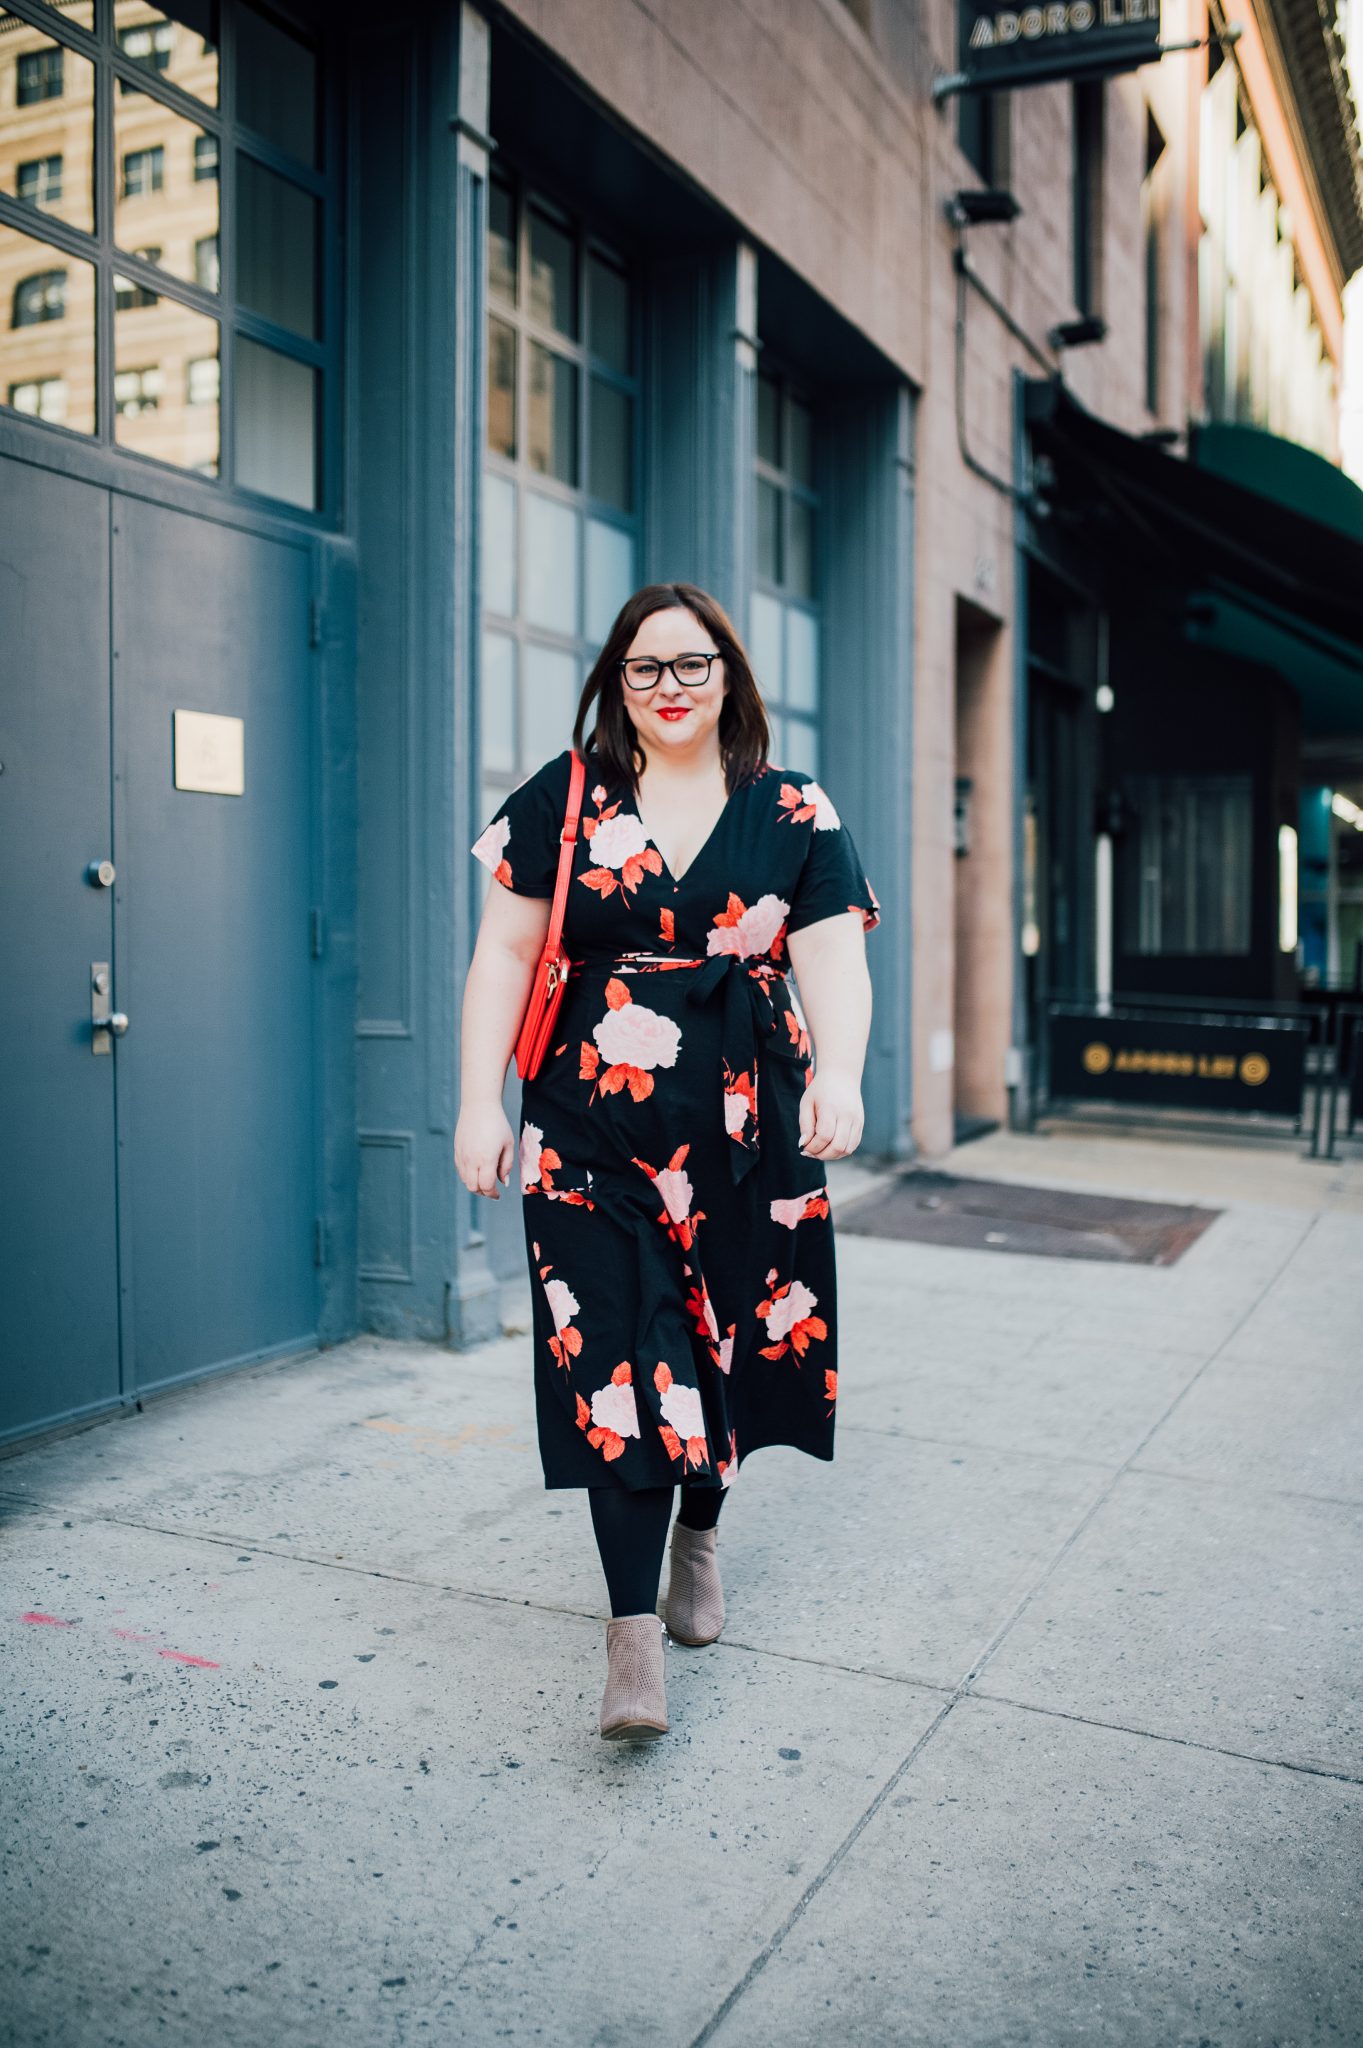 How a $33 Dress from Target Changed My Life and Why Every Woman Needs a Power Outfit